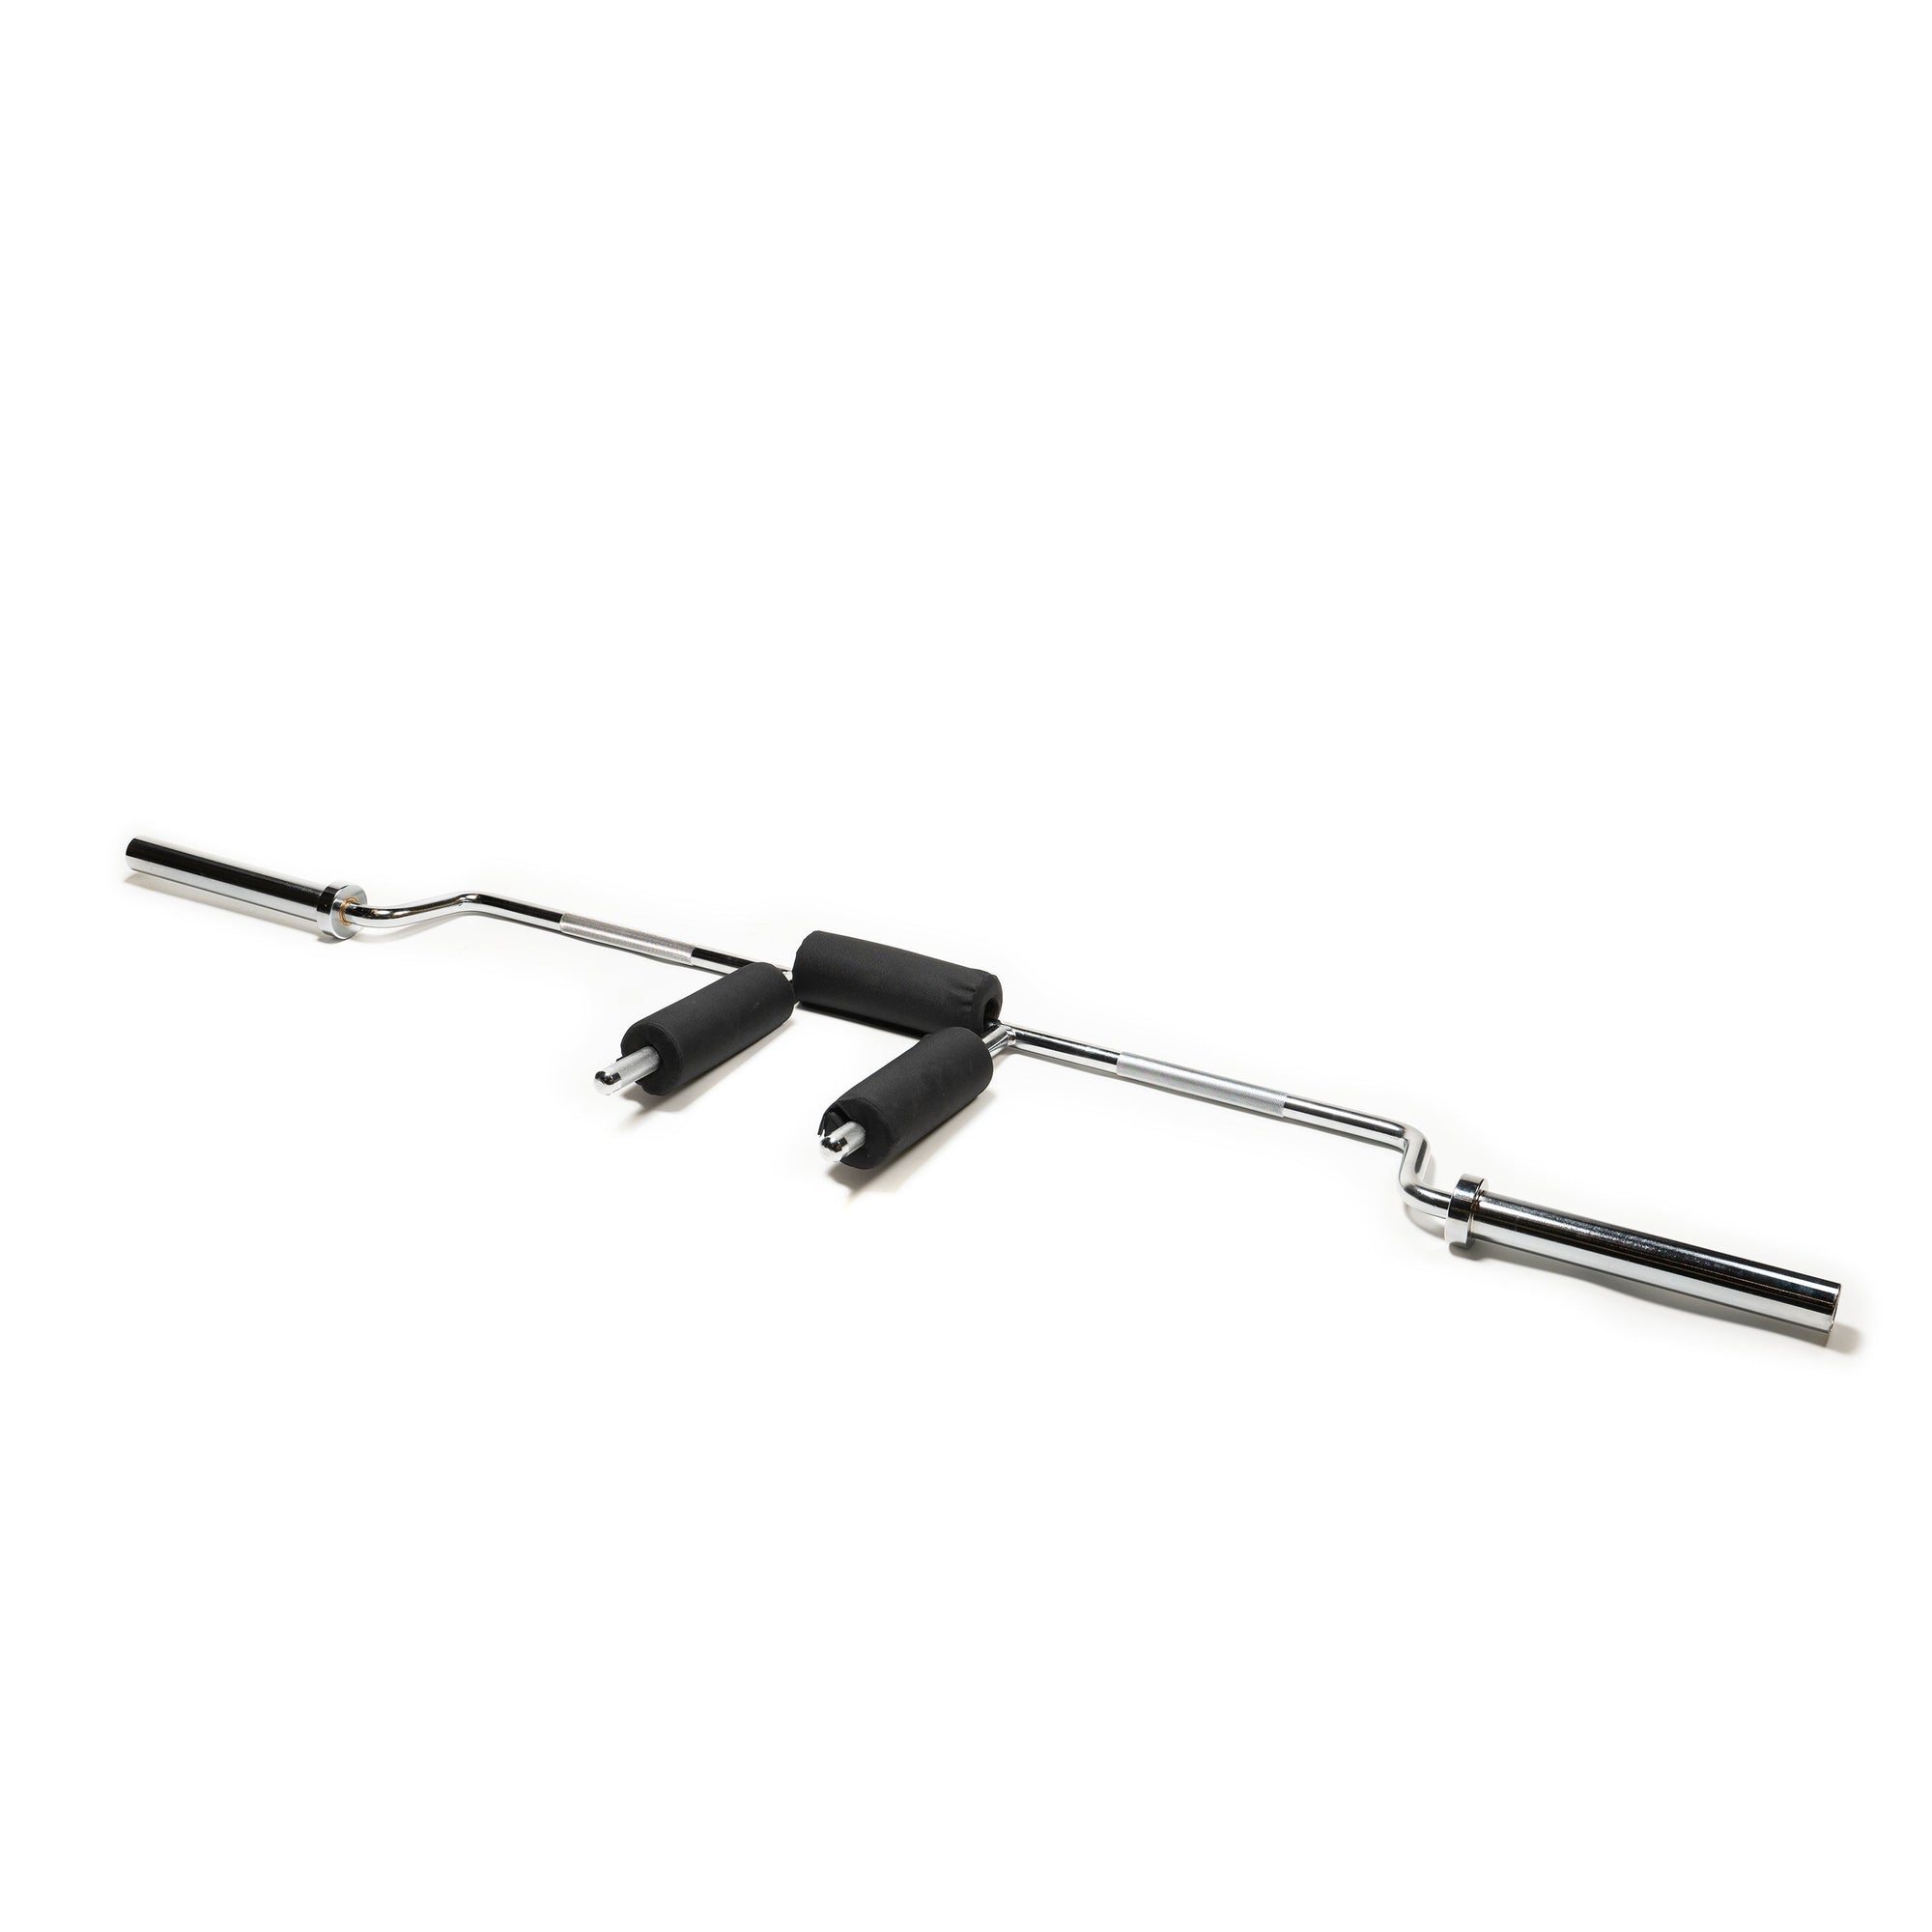 FitWay Equip. 7' Squat Bar w/ Barbell Pads